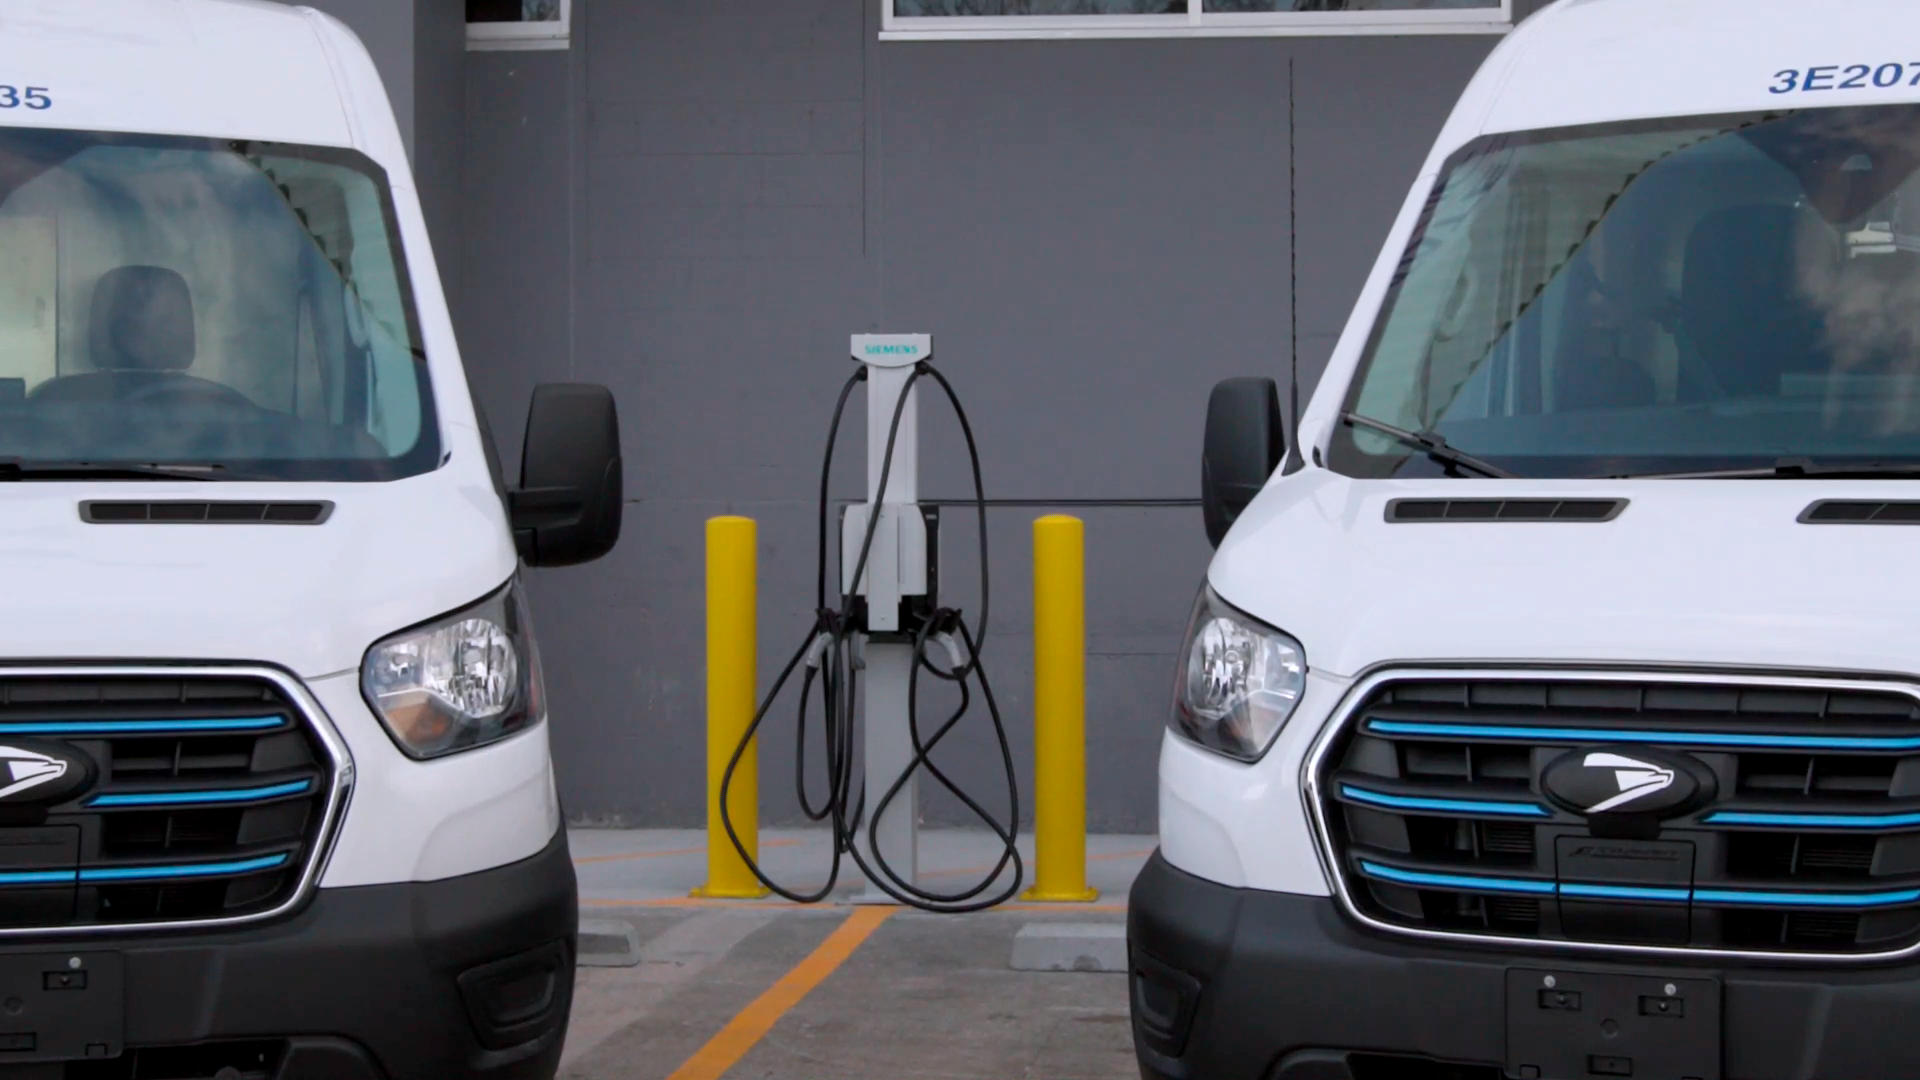 Check out the new electric postal vans and charging stations